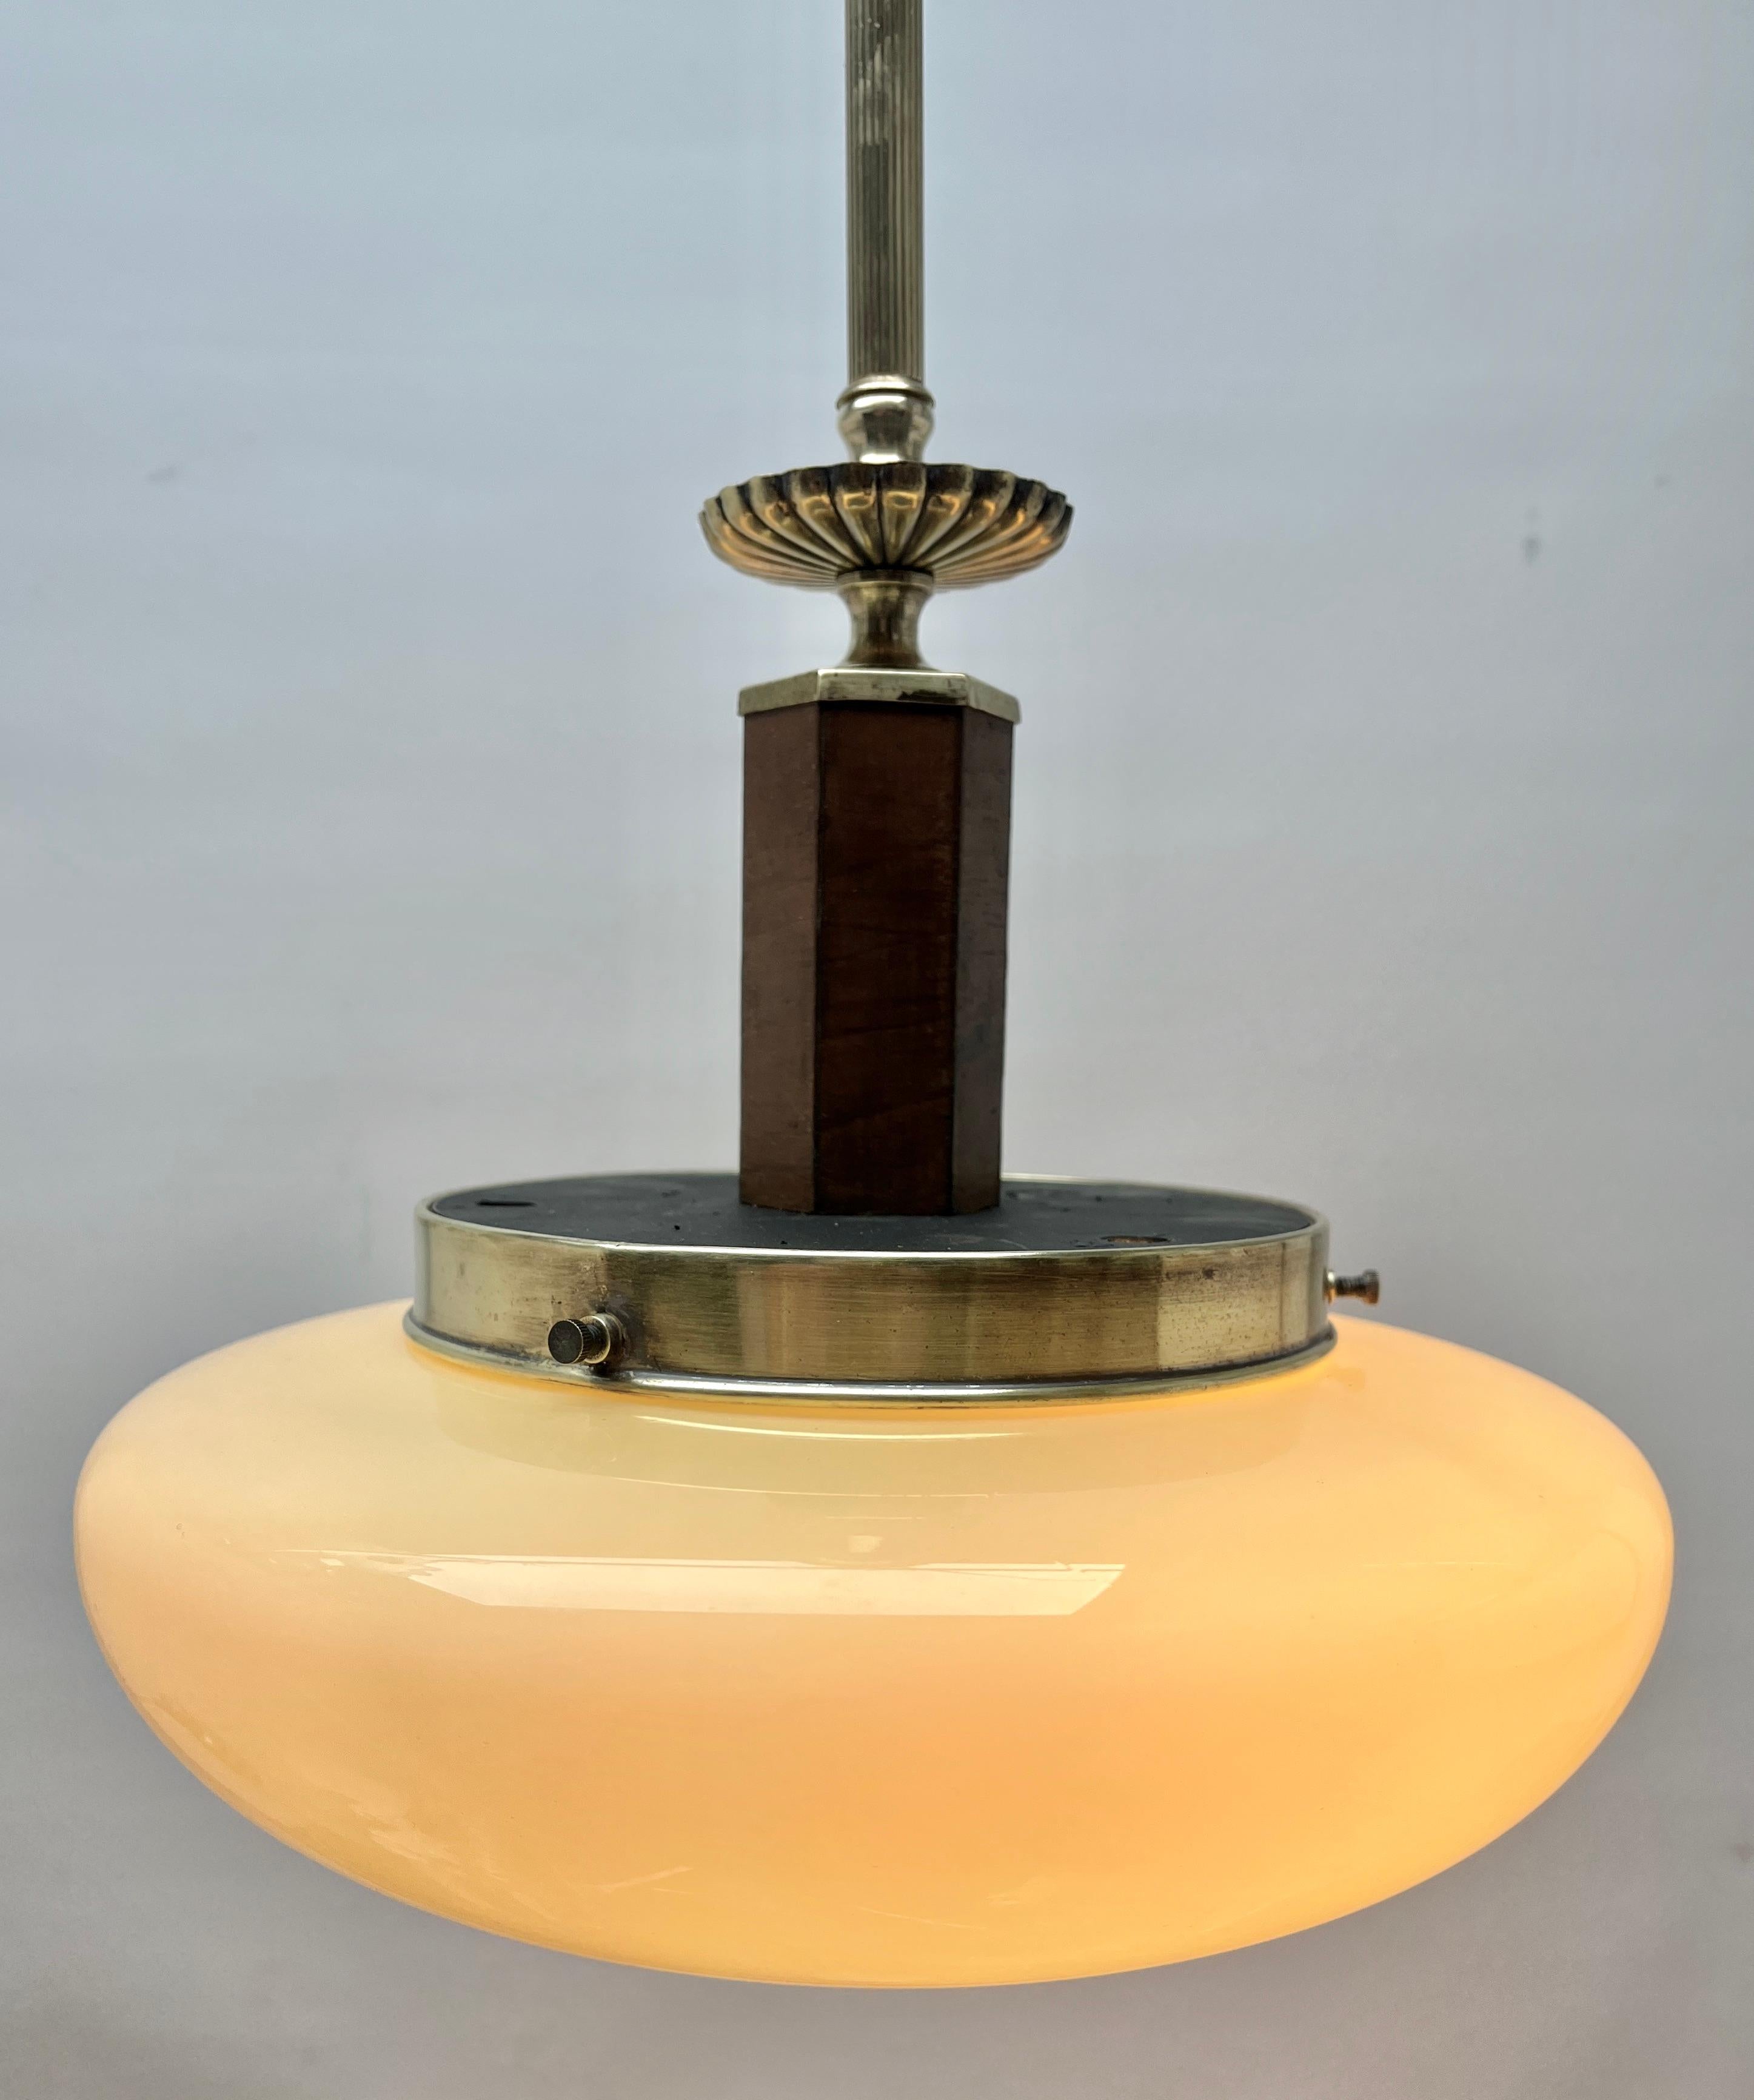 Art Deco ceiling lamp.
You can select from 2 different Globes see Picture

Photography fails to capture the simple elegant illumination provided by this lamp.

Fitting messing pendant ceiling light with screw fixing to hold a stylish Belgian Art